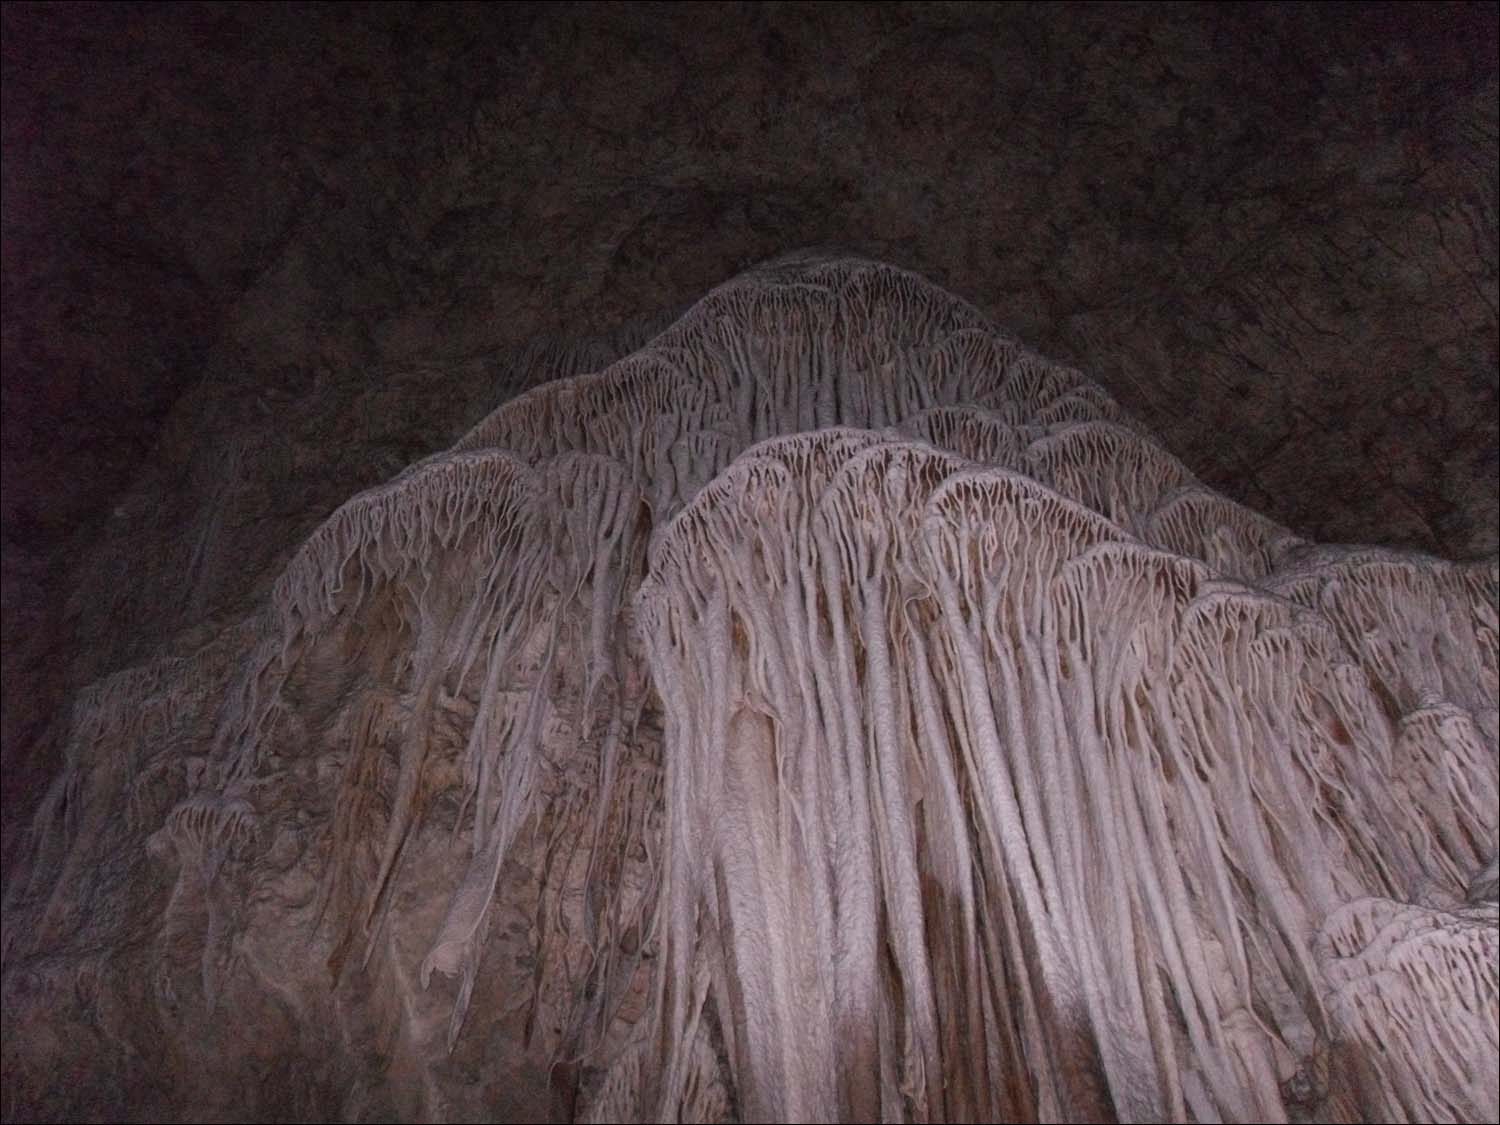 Carlsbad Caverns, NM-large drapery formation on wall